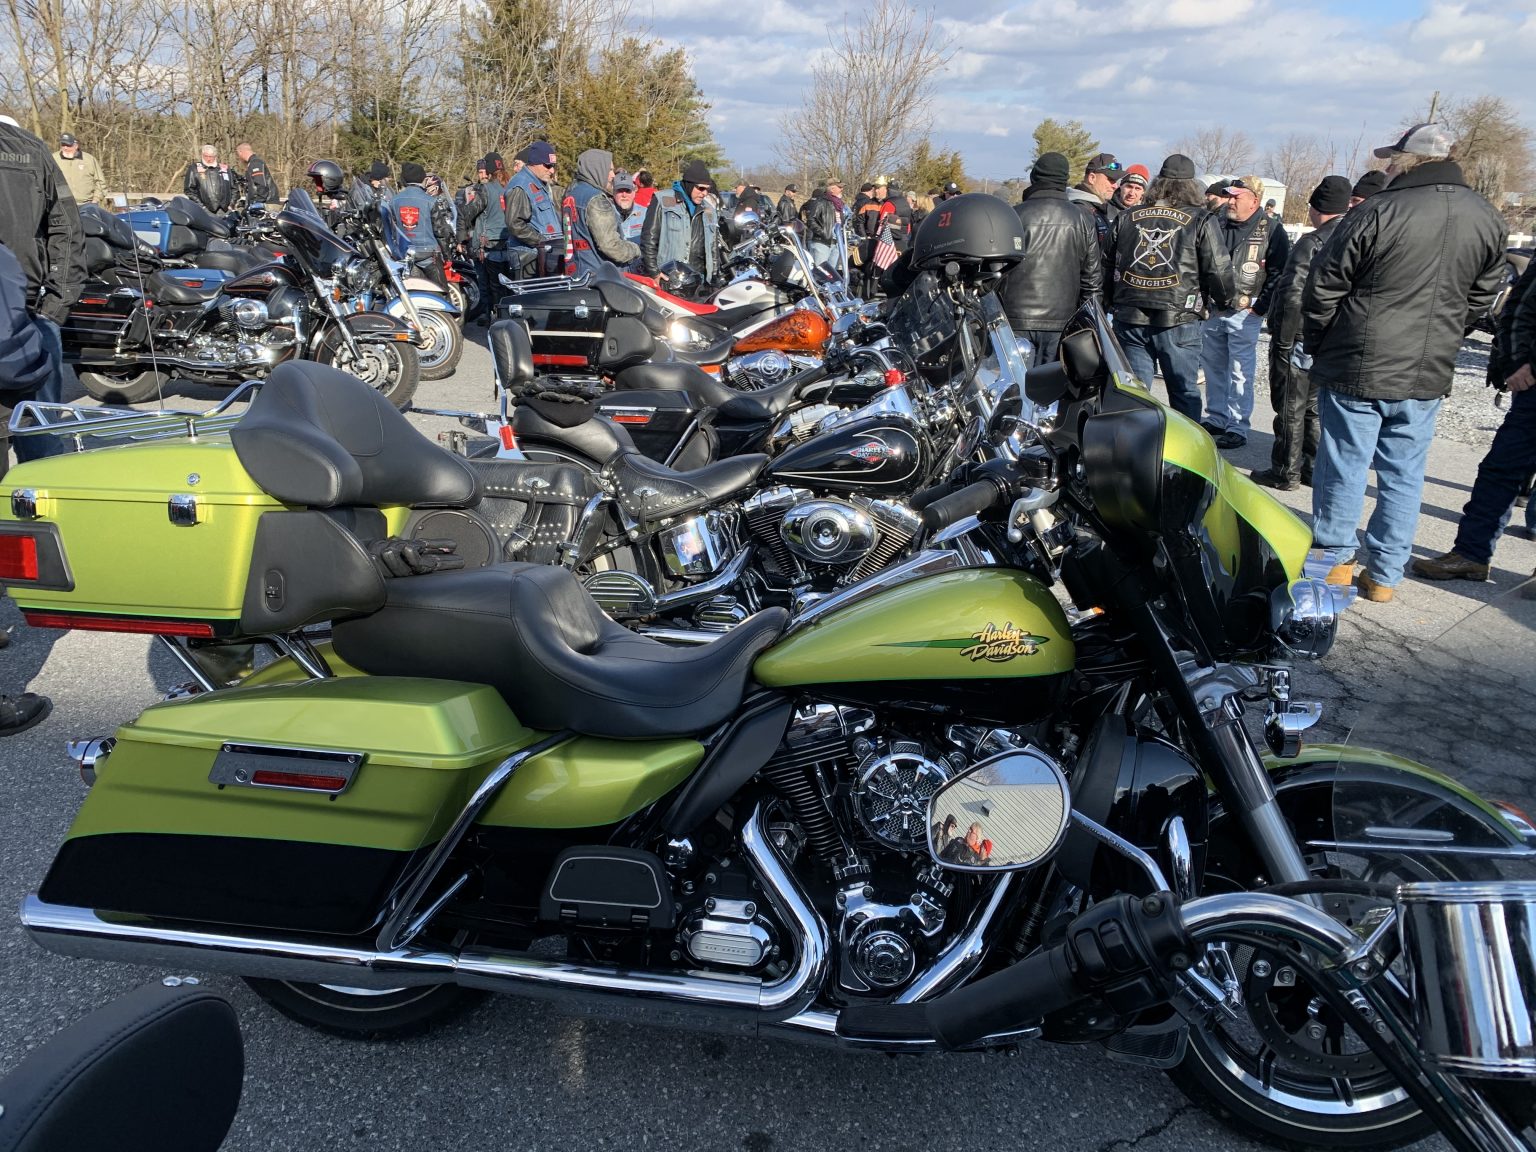 Frosty Balls and Frozen Susies Poker Run to Benefit Veterans on 30